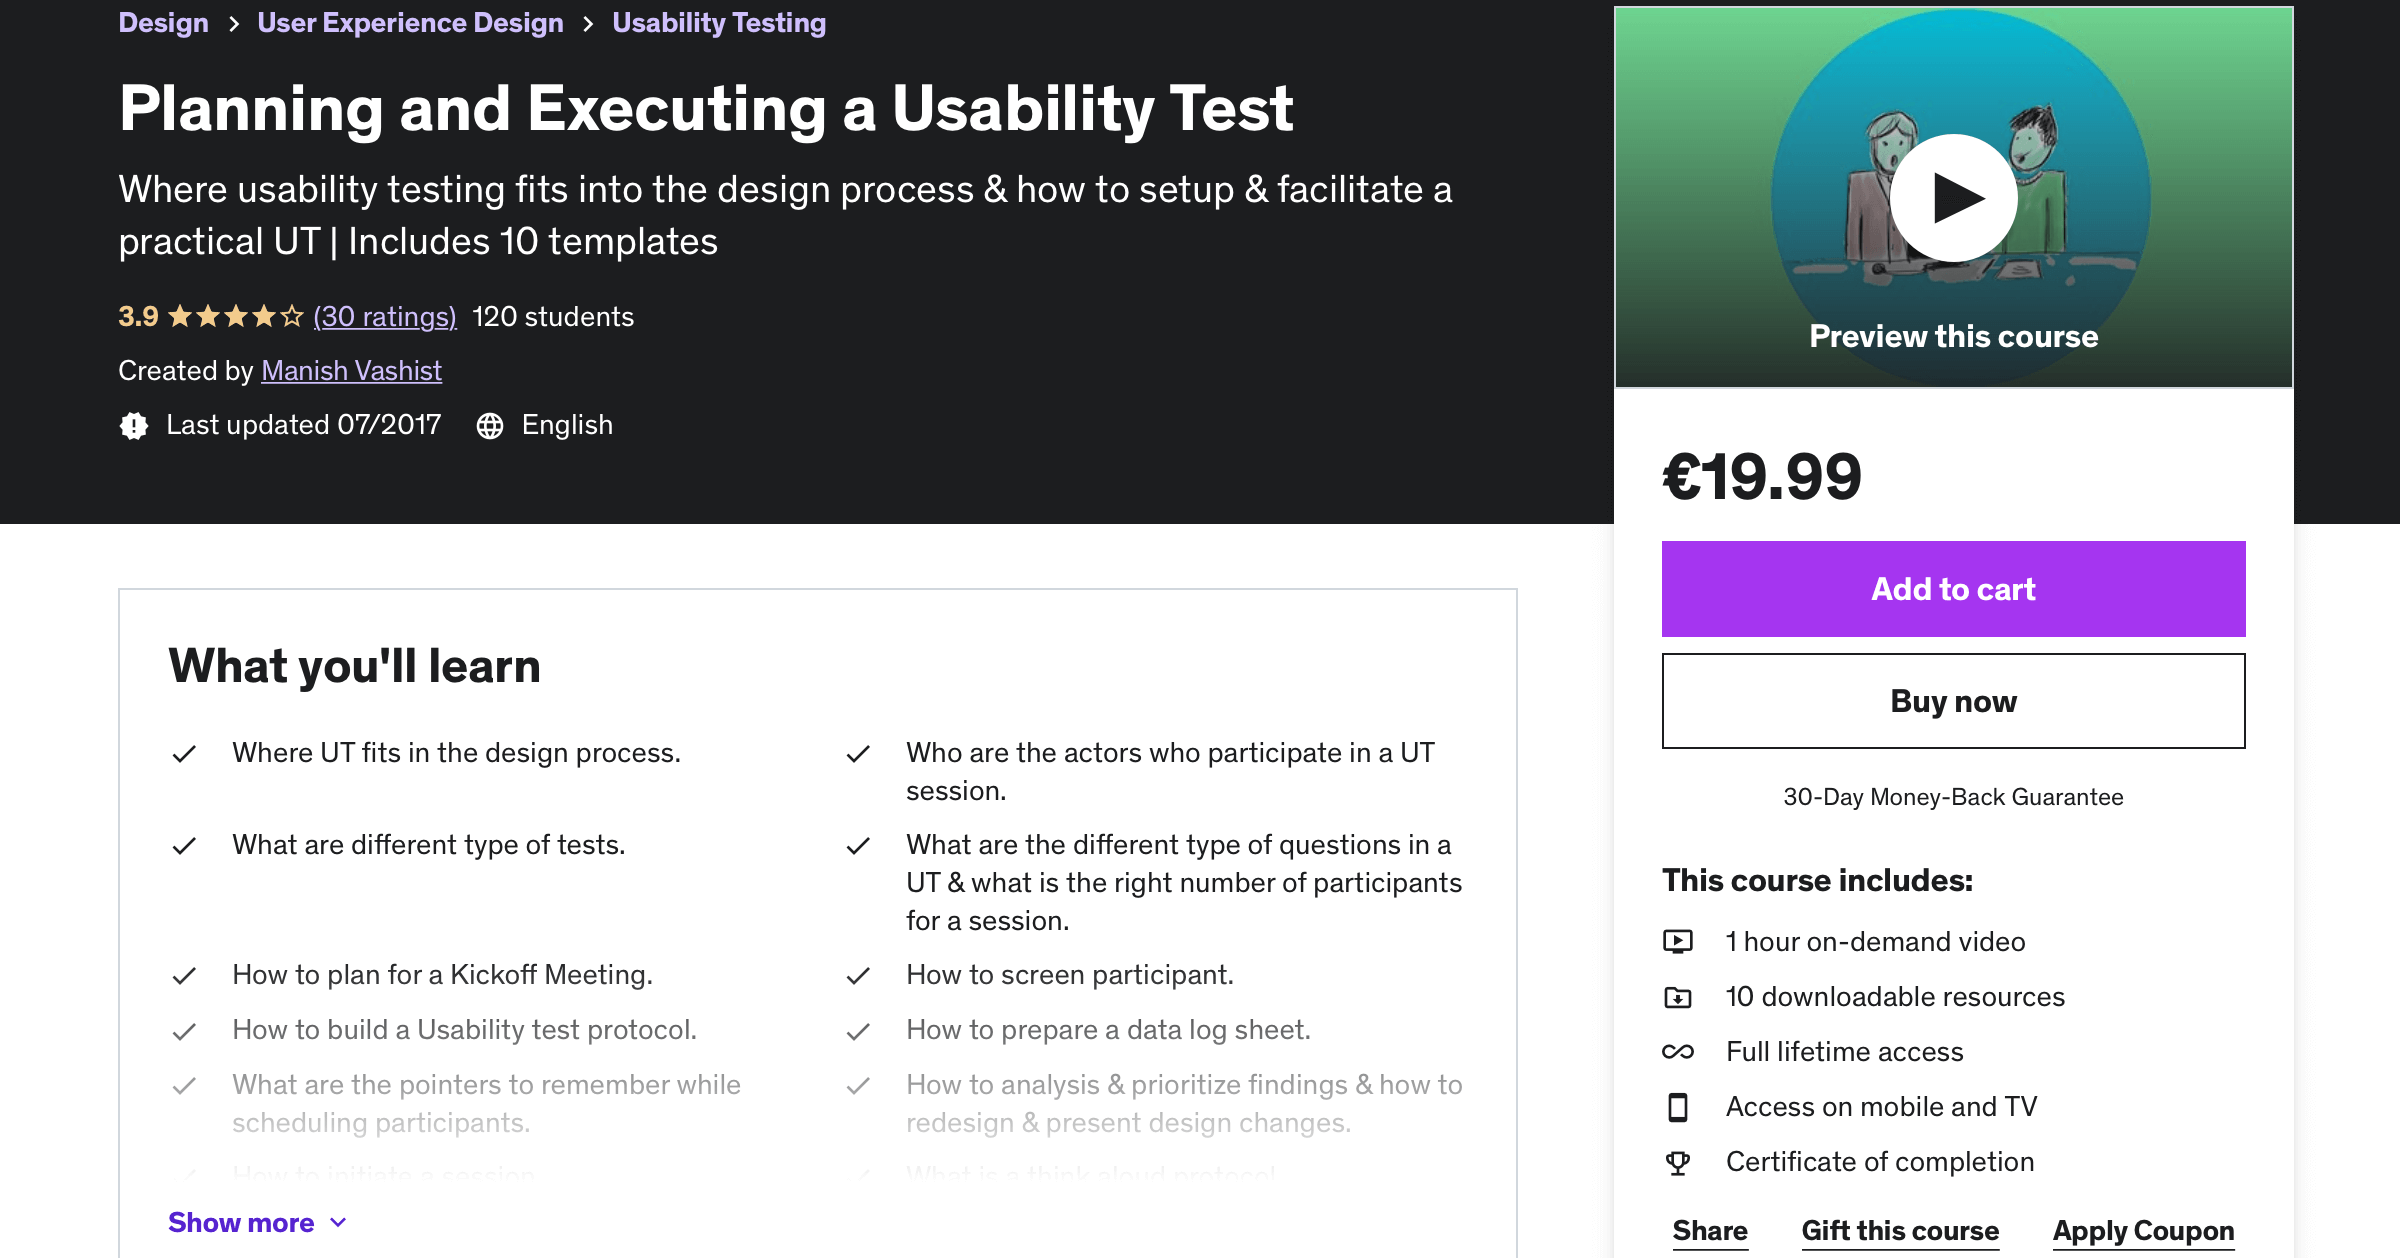 Best online courses usability testing - Planning and executing usability tests